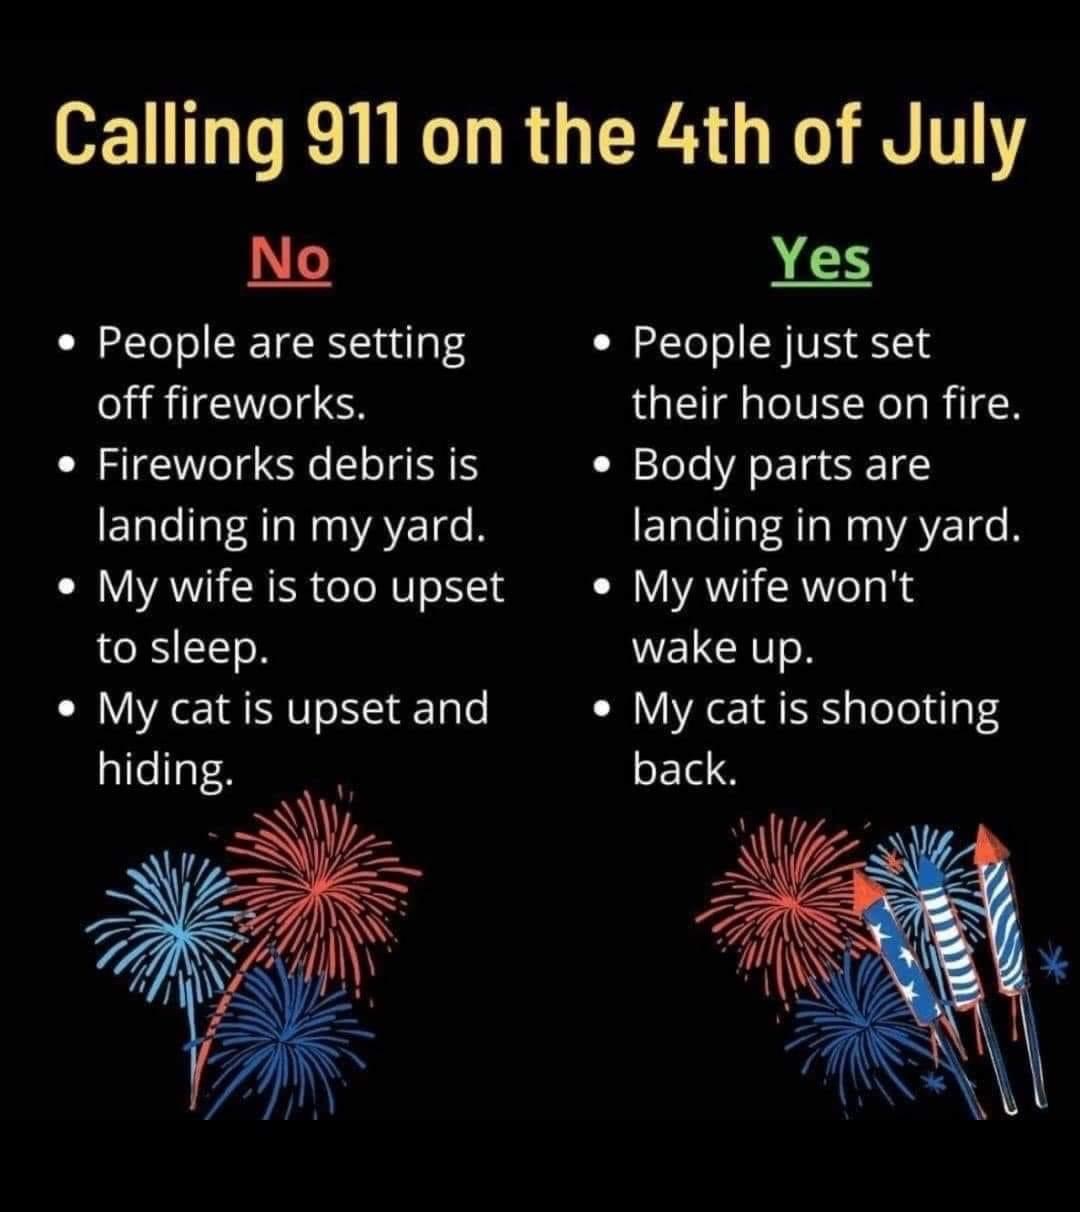 Don’t call 911 unless it’s an emergency